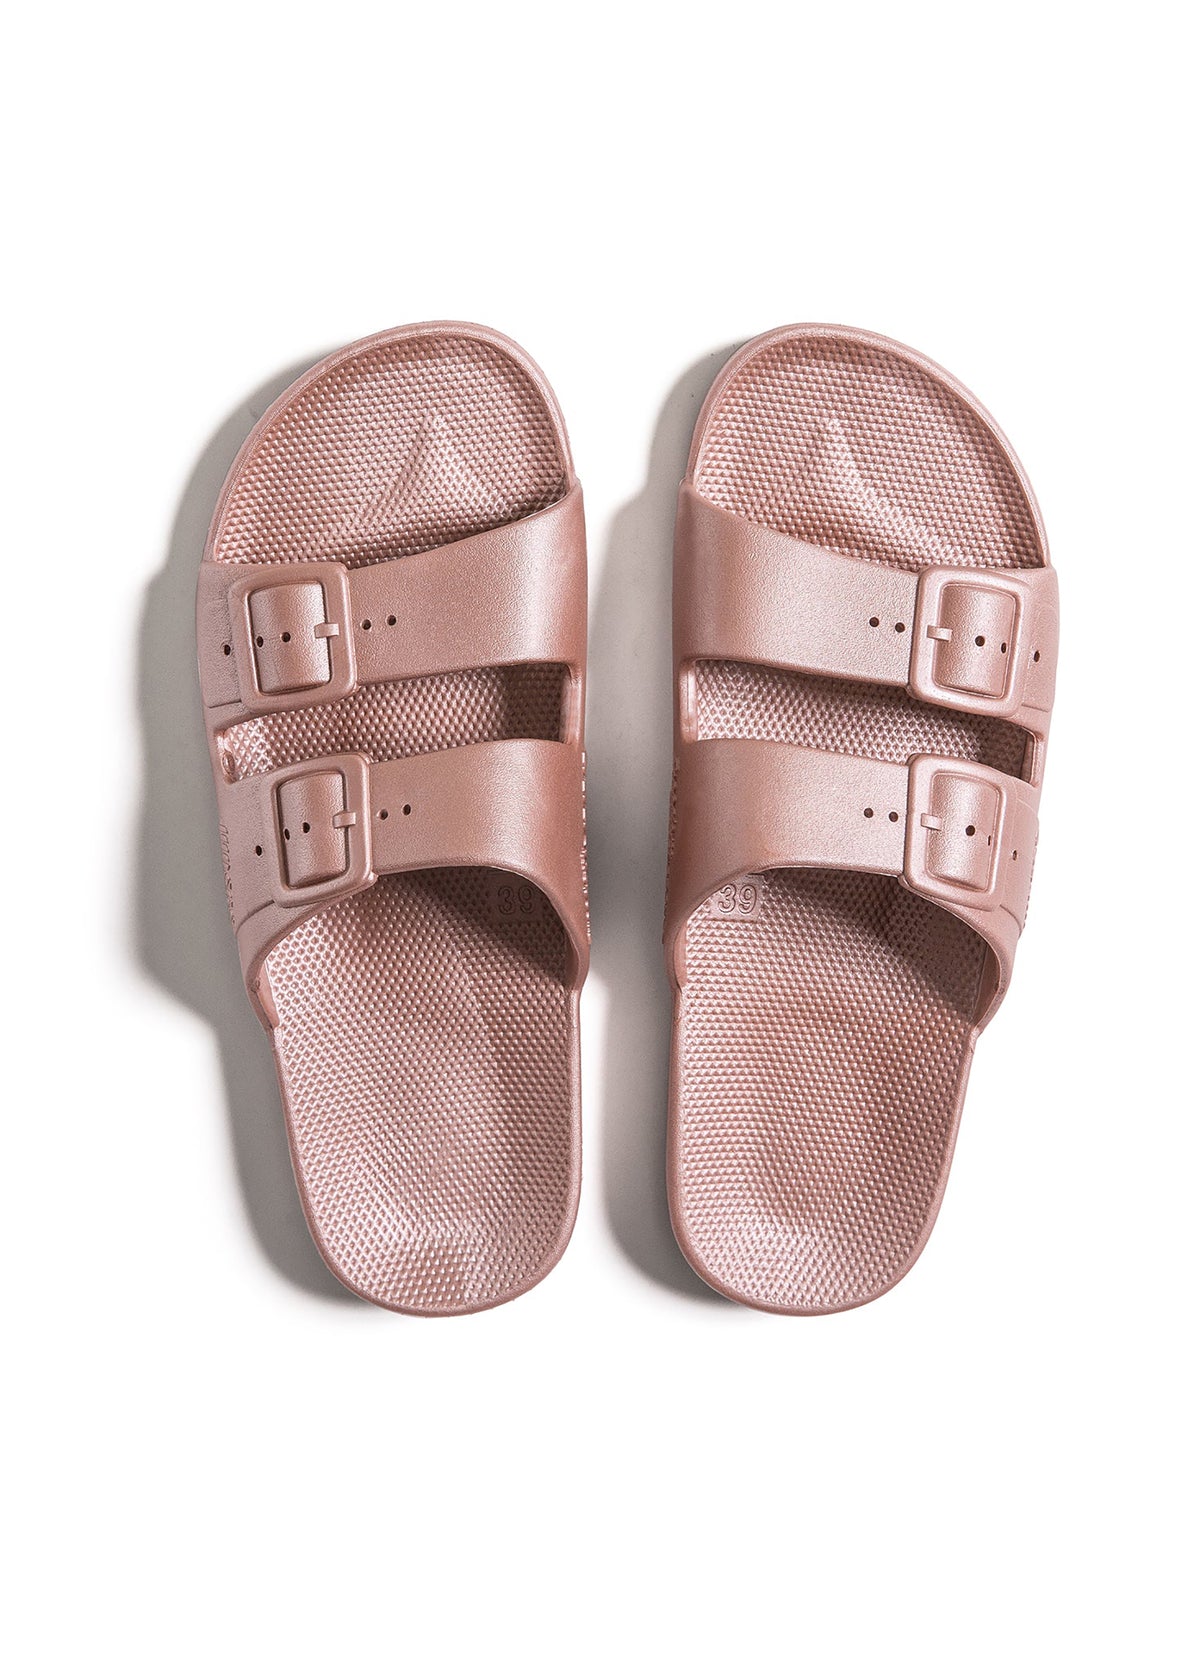 Freedom Moses sandals - wedges with two straps, Venus Shimmer, shimmering pink